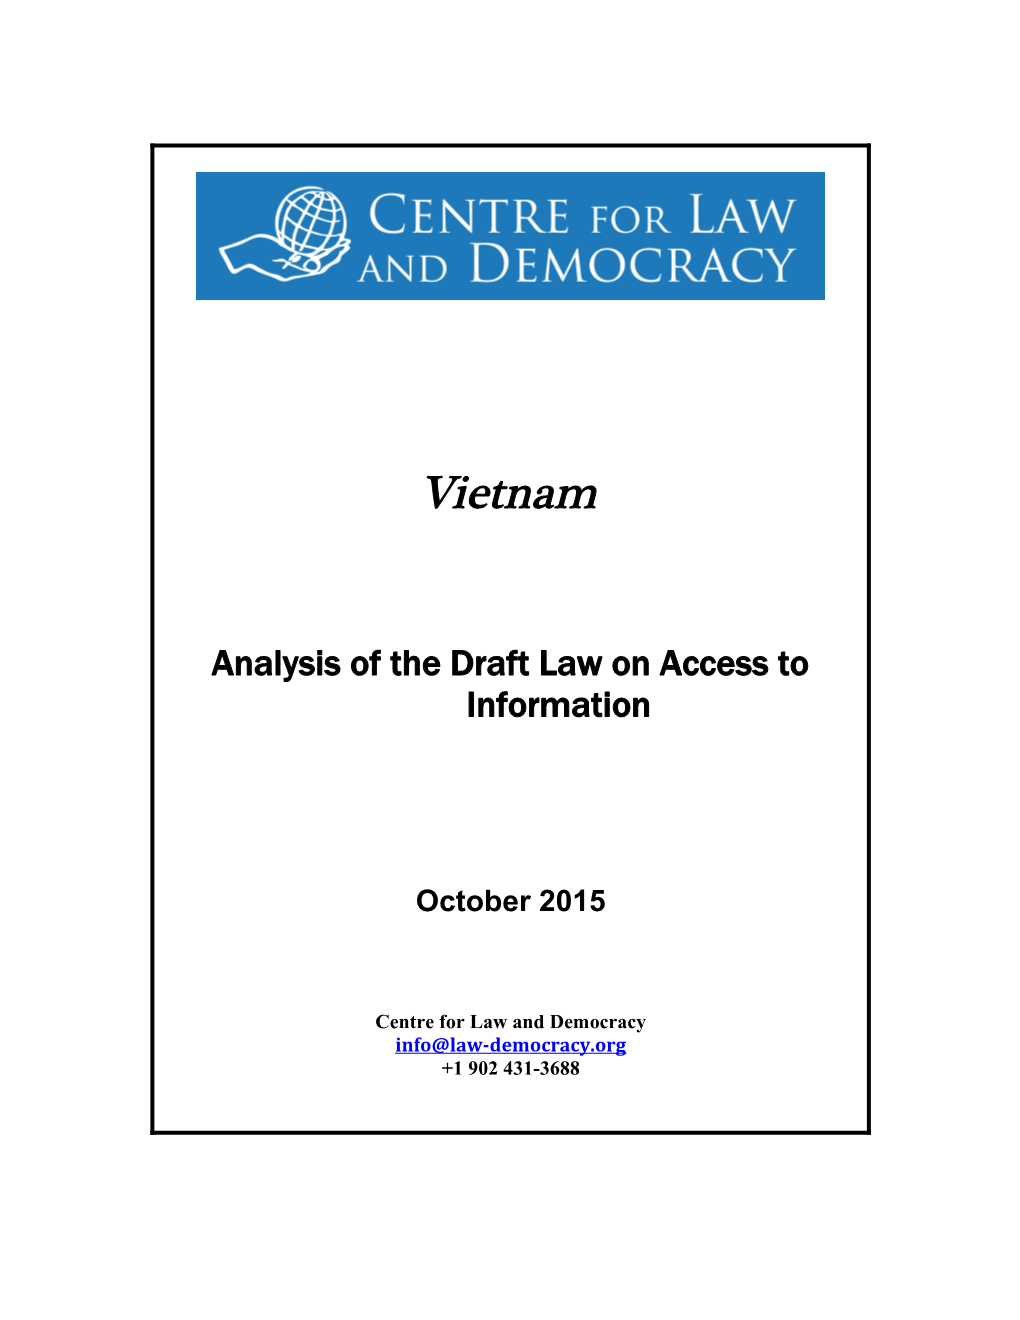 Vietnam: Analysis of the Draft Law on Access to Information